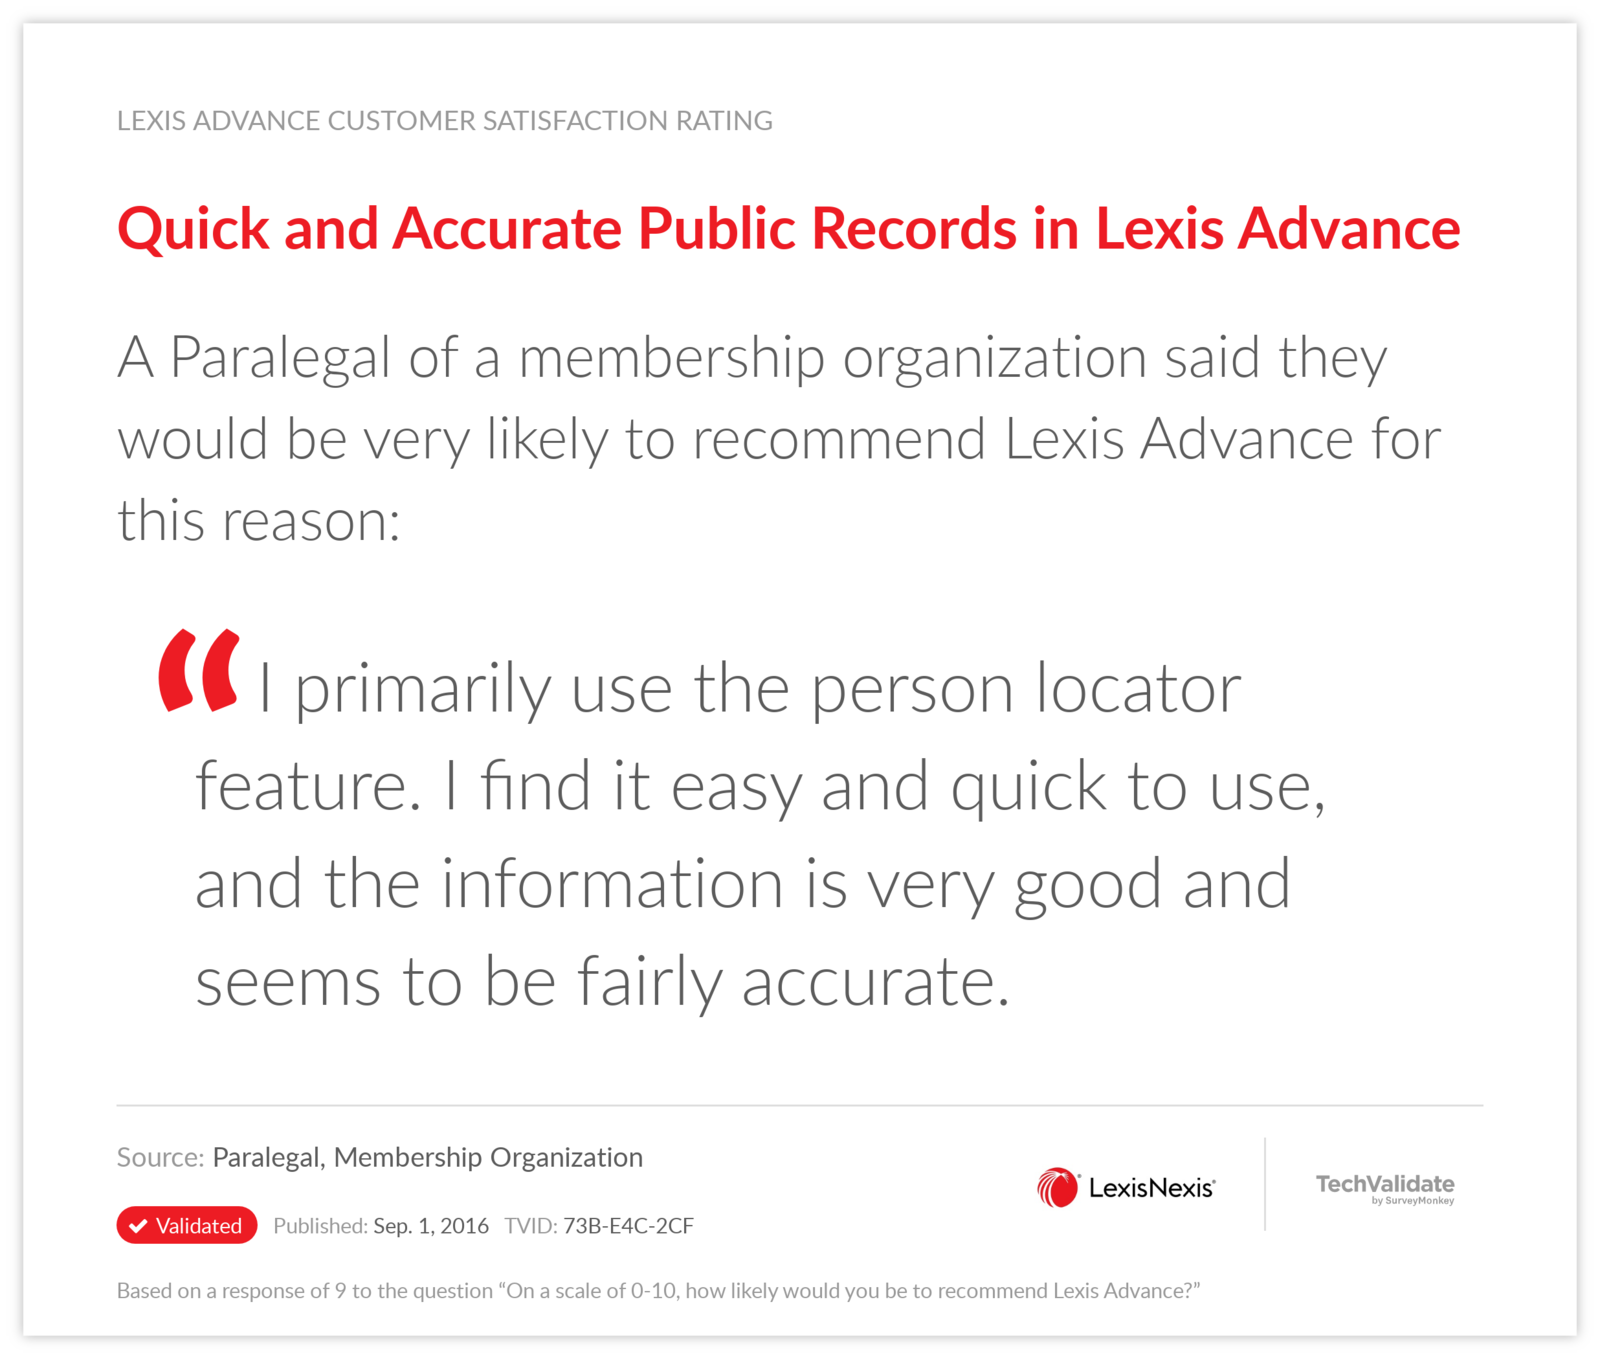 Quick and Accurate Public Records in Lexis Advance